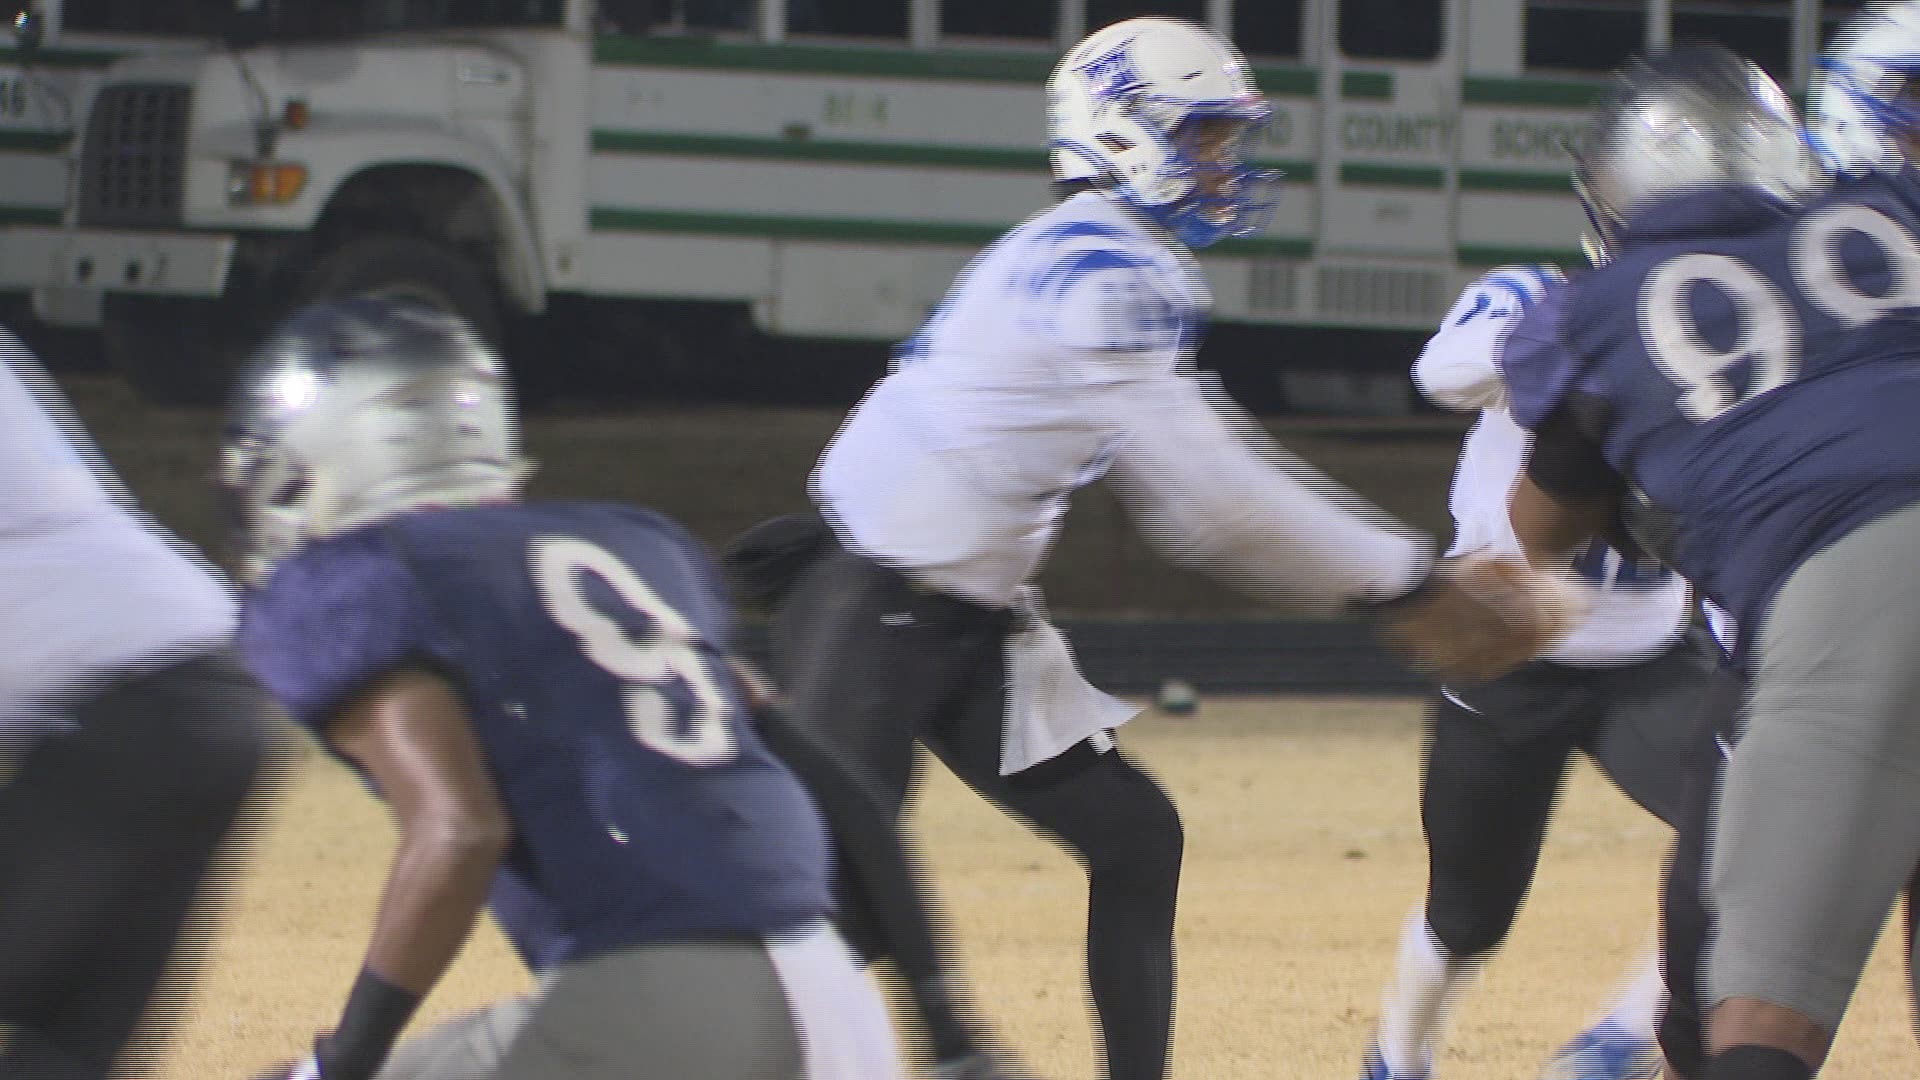 East Forsyth wins 34-21 and advances to 4A West Regional Final